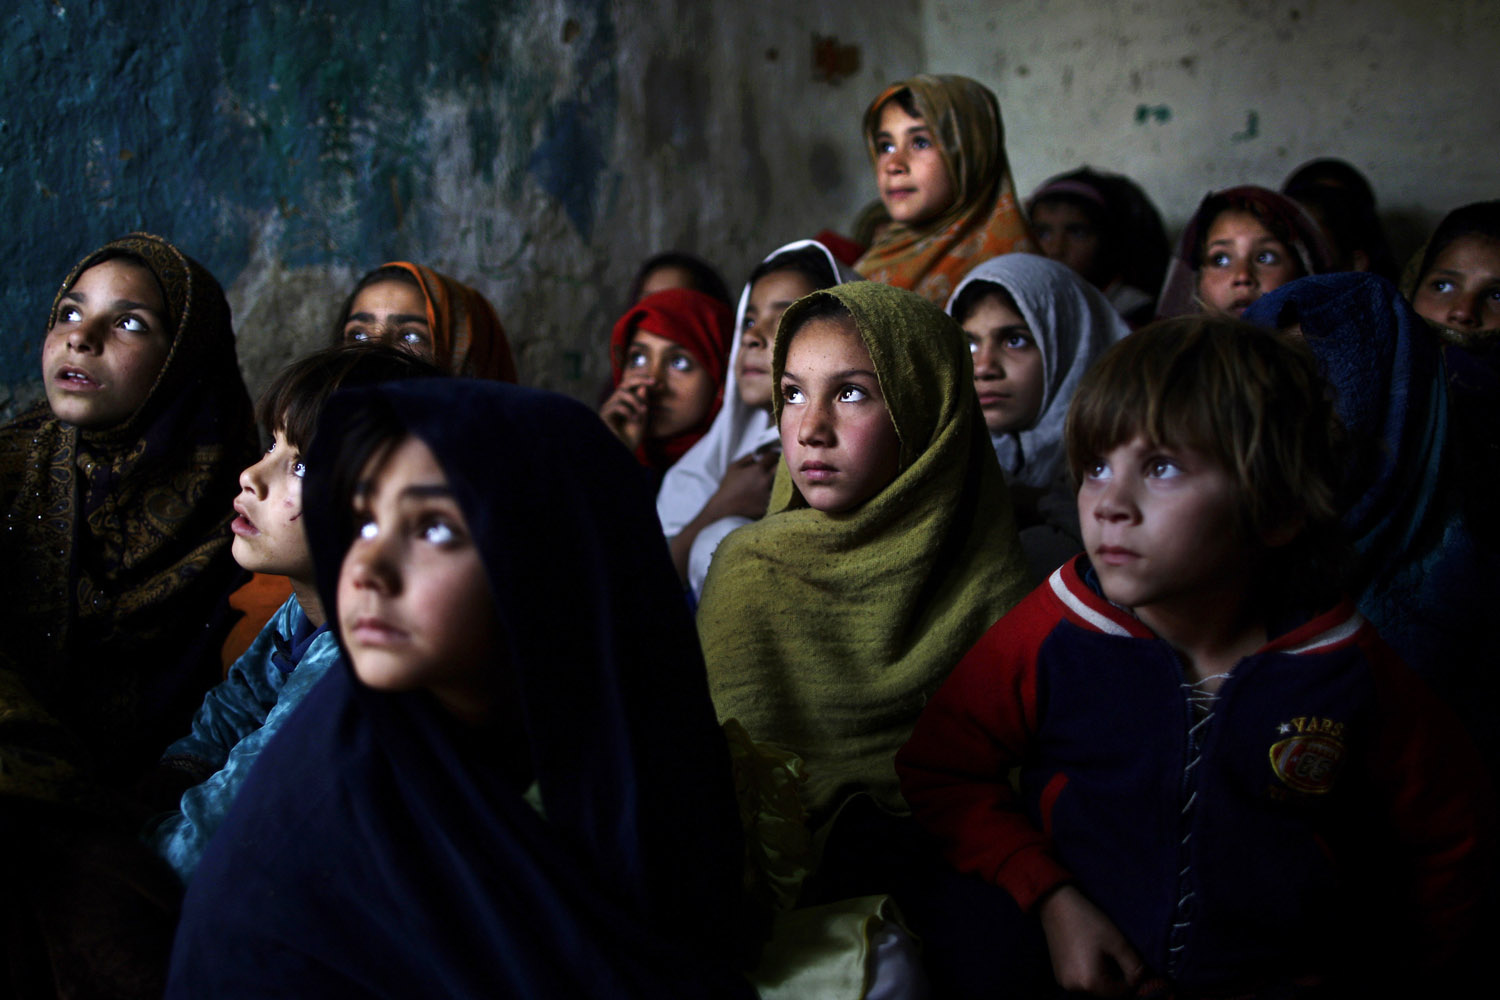 Jan. 31, 2013. Pakistani schoolgirls who were displaced with their families from Pakistan's tribal areas due to fighting between militants and the army listen to their teacher in a poor neighborhood on the outskirts of Islamabad.